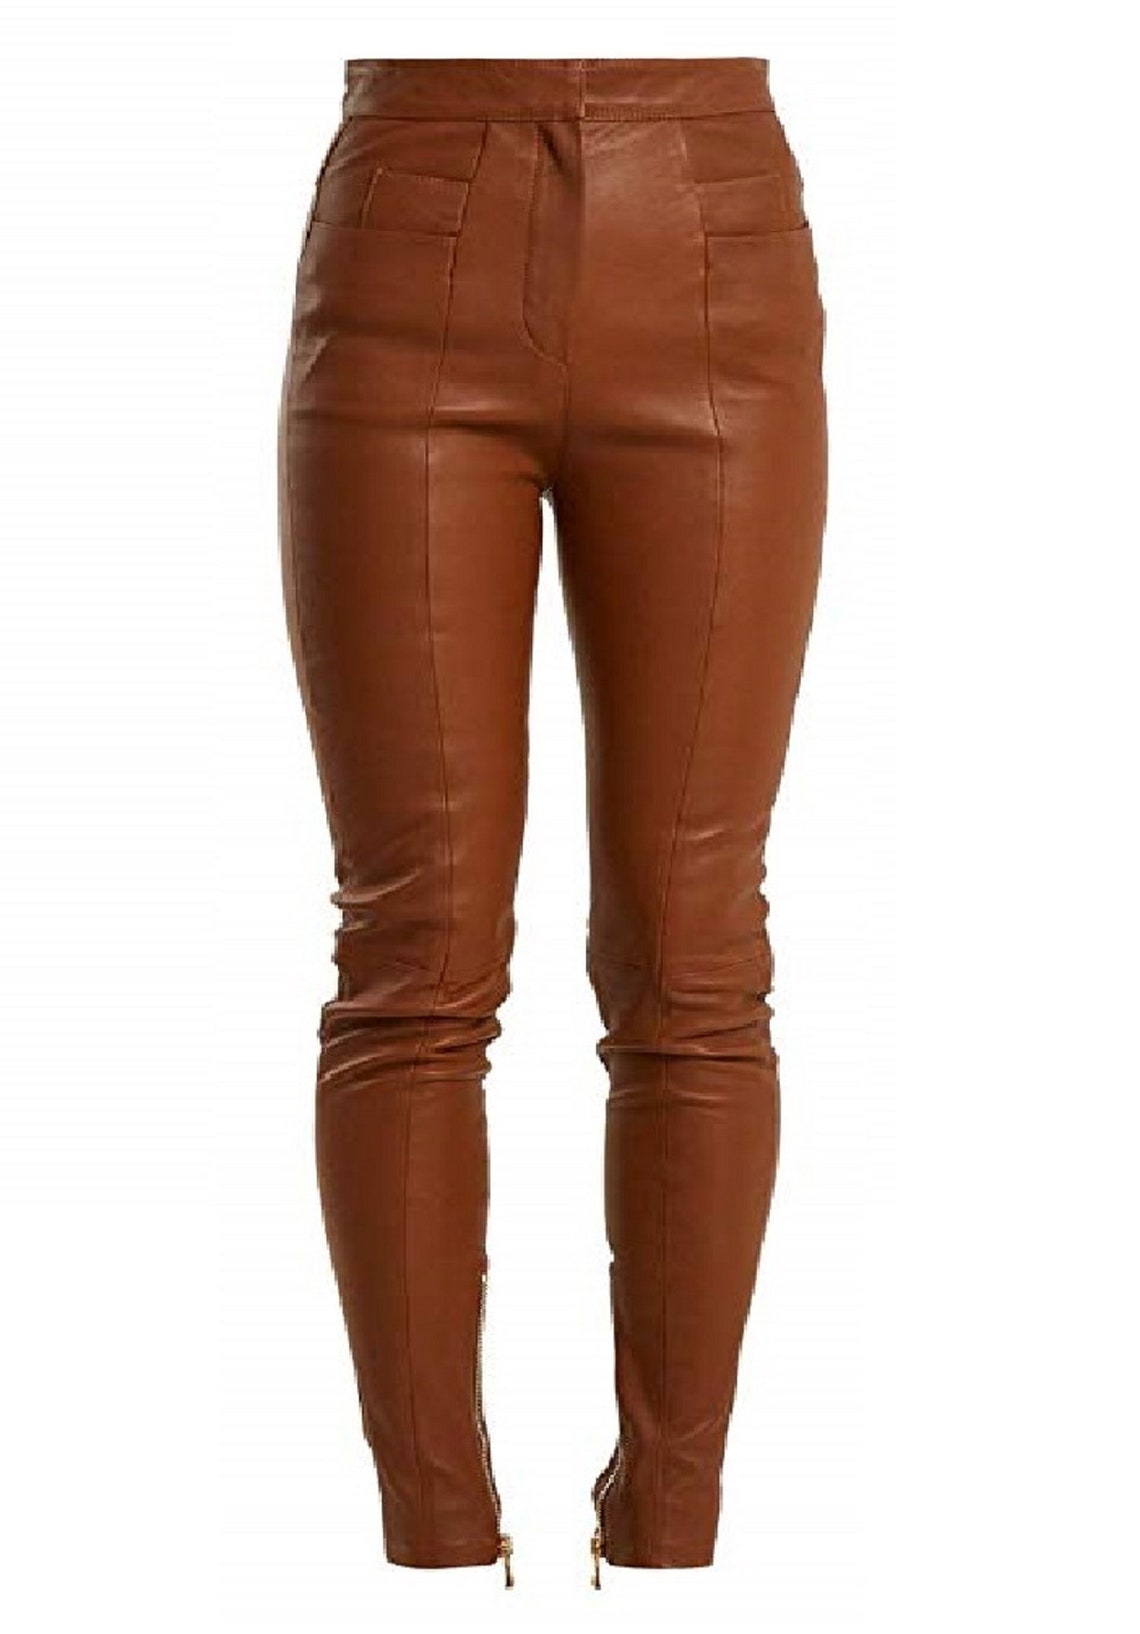 New Trendy Brown Lambskin LEATHER PANT Women Solid - Etsy UK